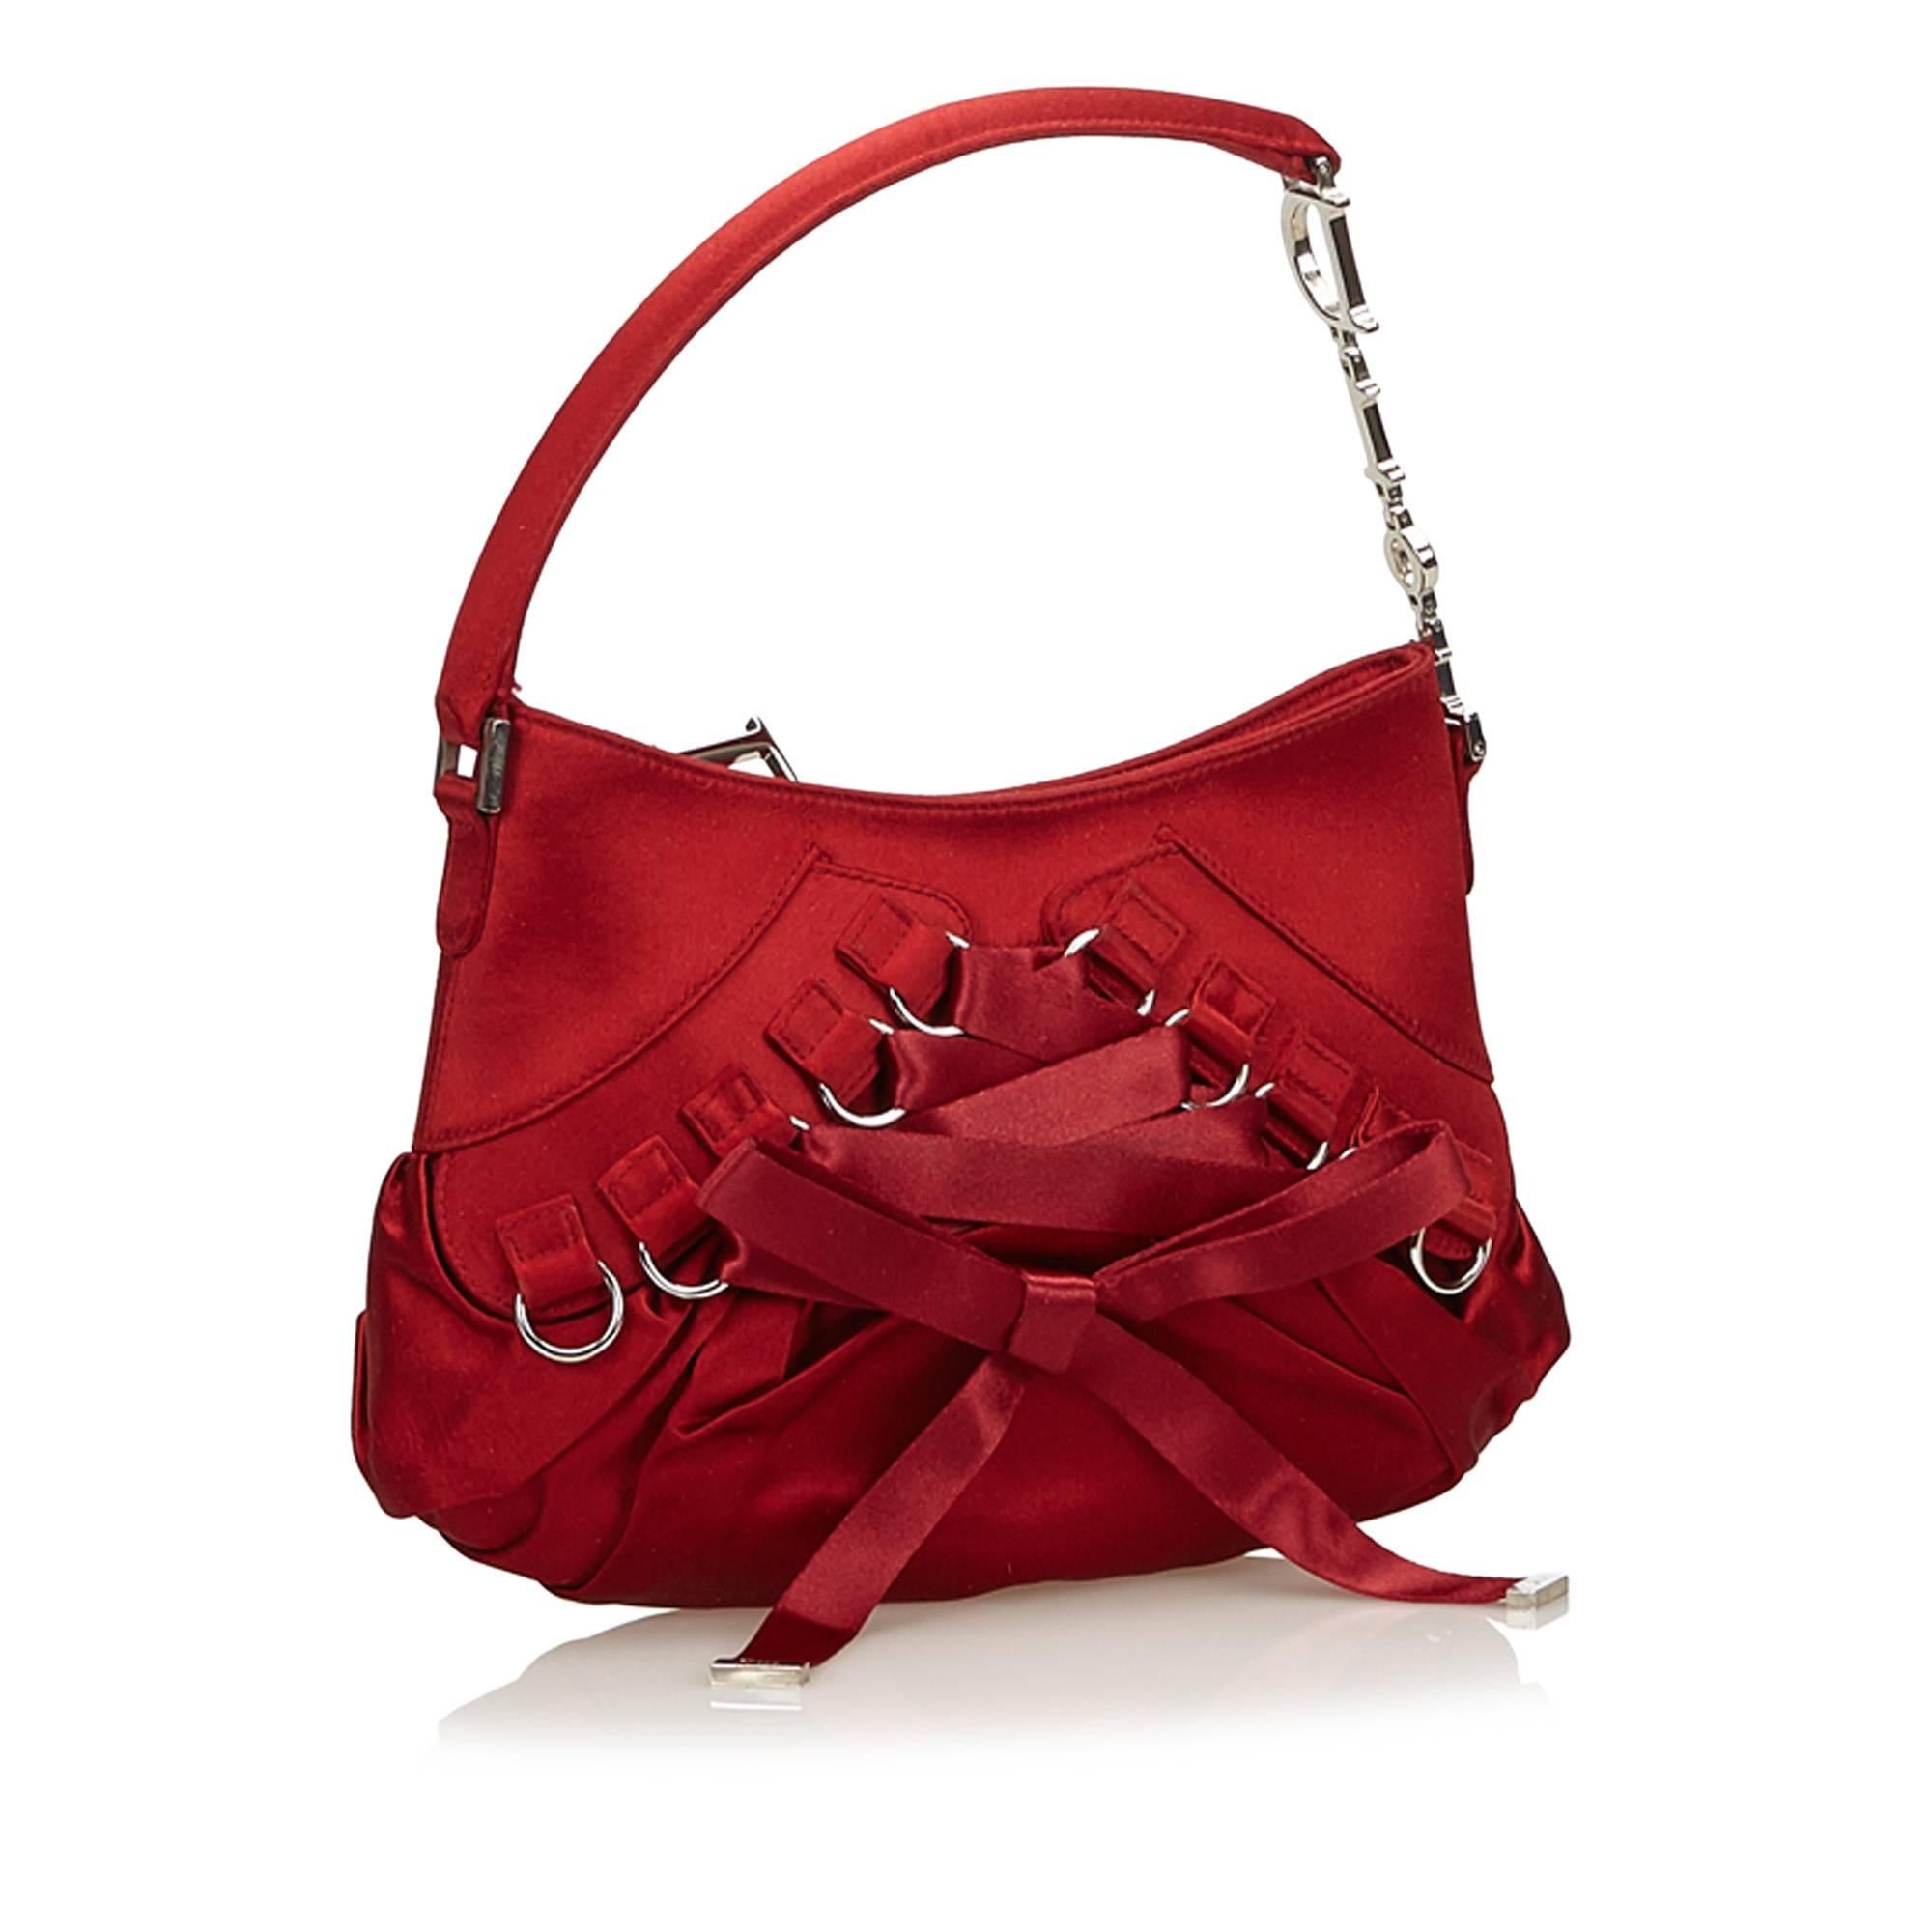 This handbag features a satin body with corset embellishment, flat handle, top zip closure, and interior slip pocket.

It carries a A condition rating.

Dimensions: 
Length 14 cm
Width 22 cm
Depth 6 cm
Hand Drop 12 

Inclusions: No longer comes with